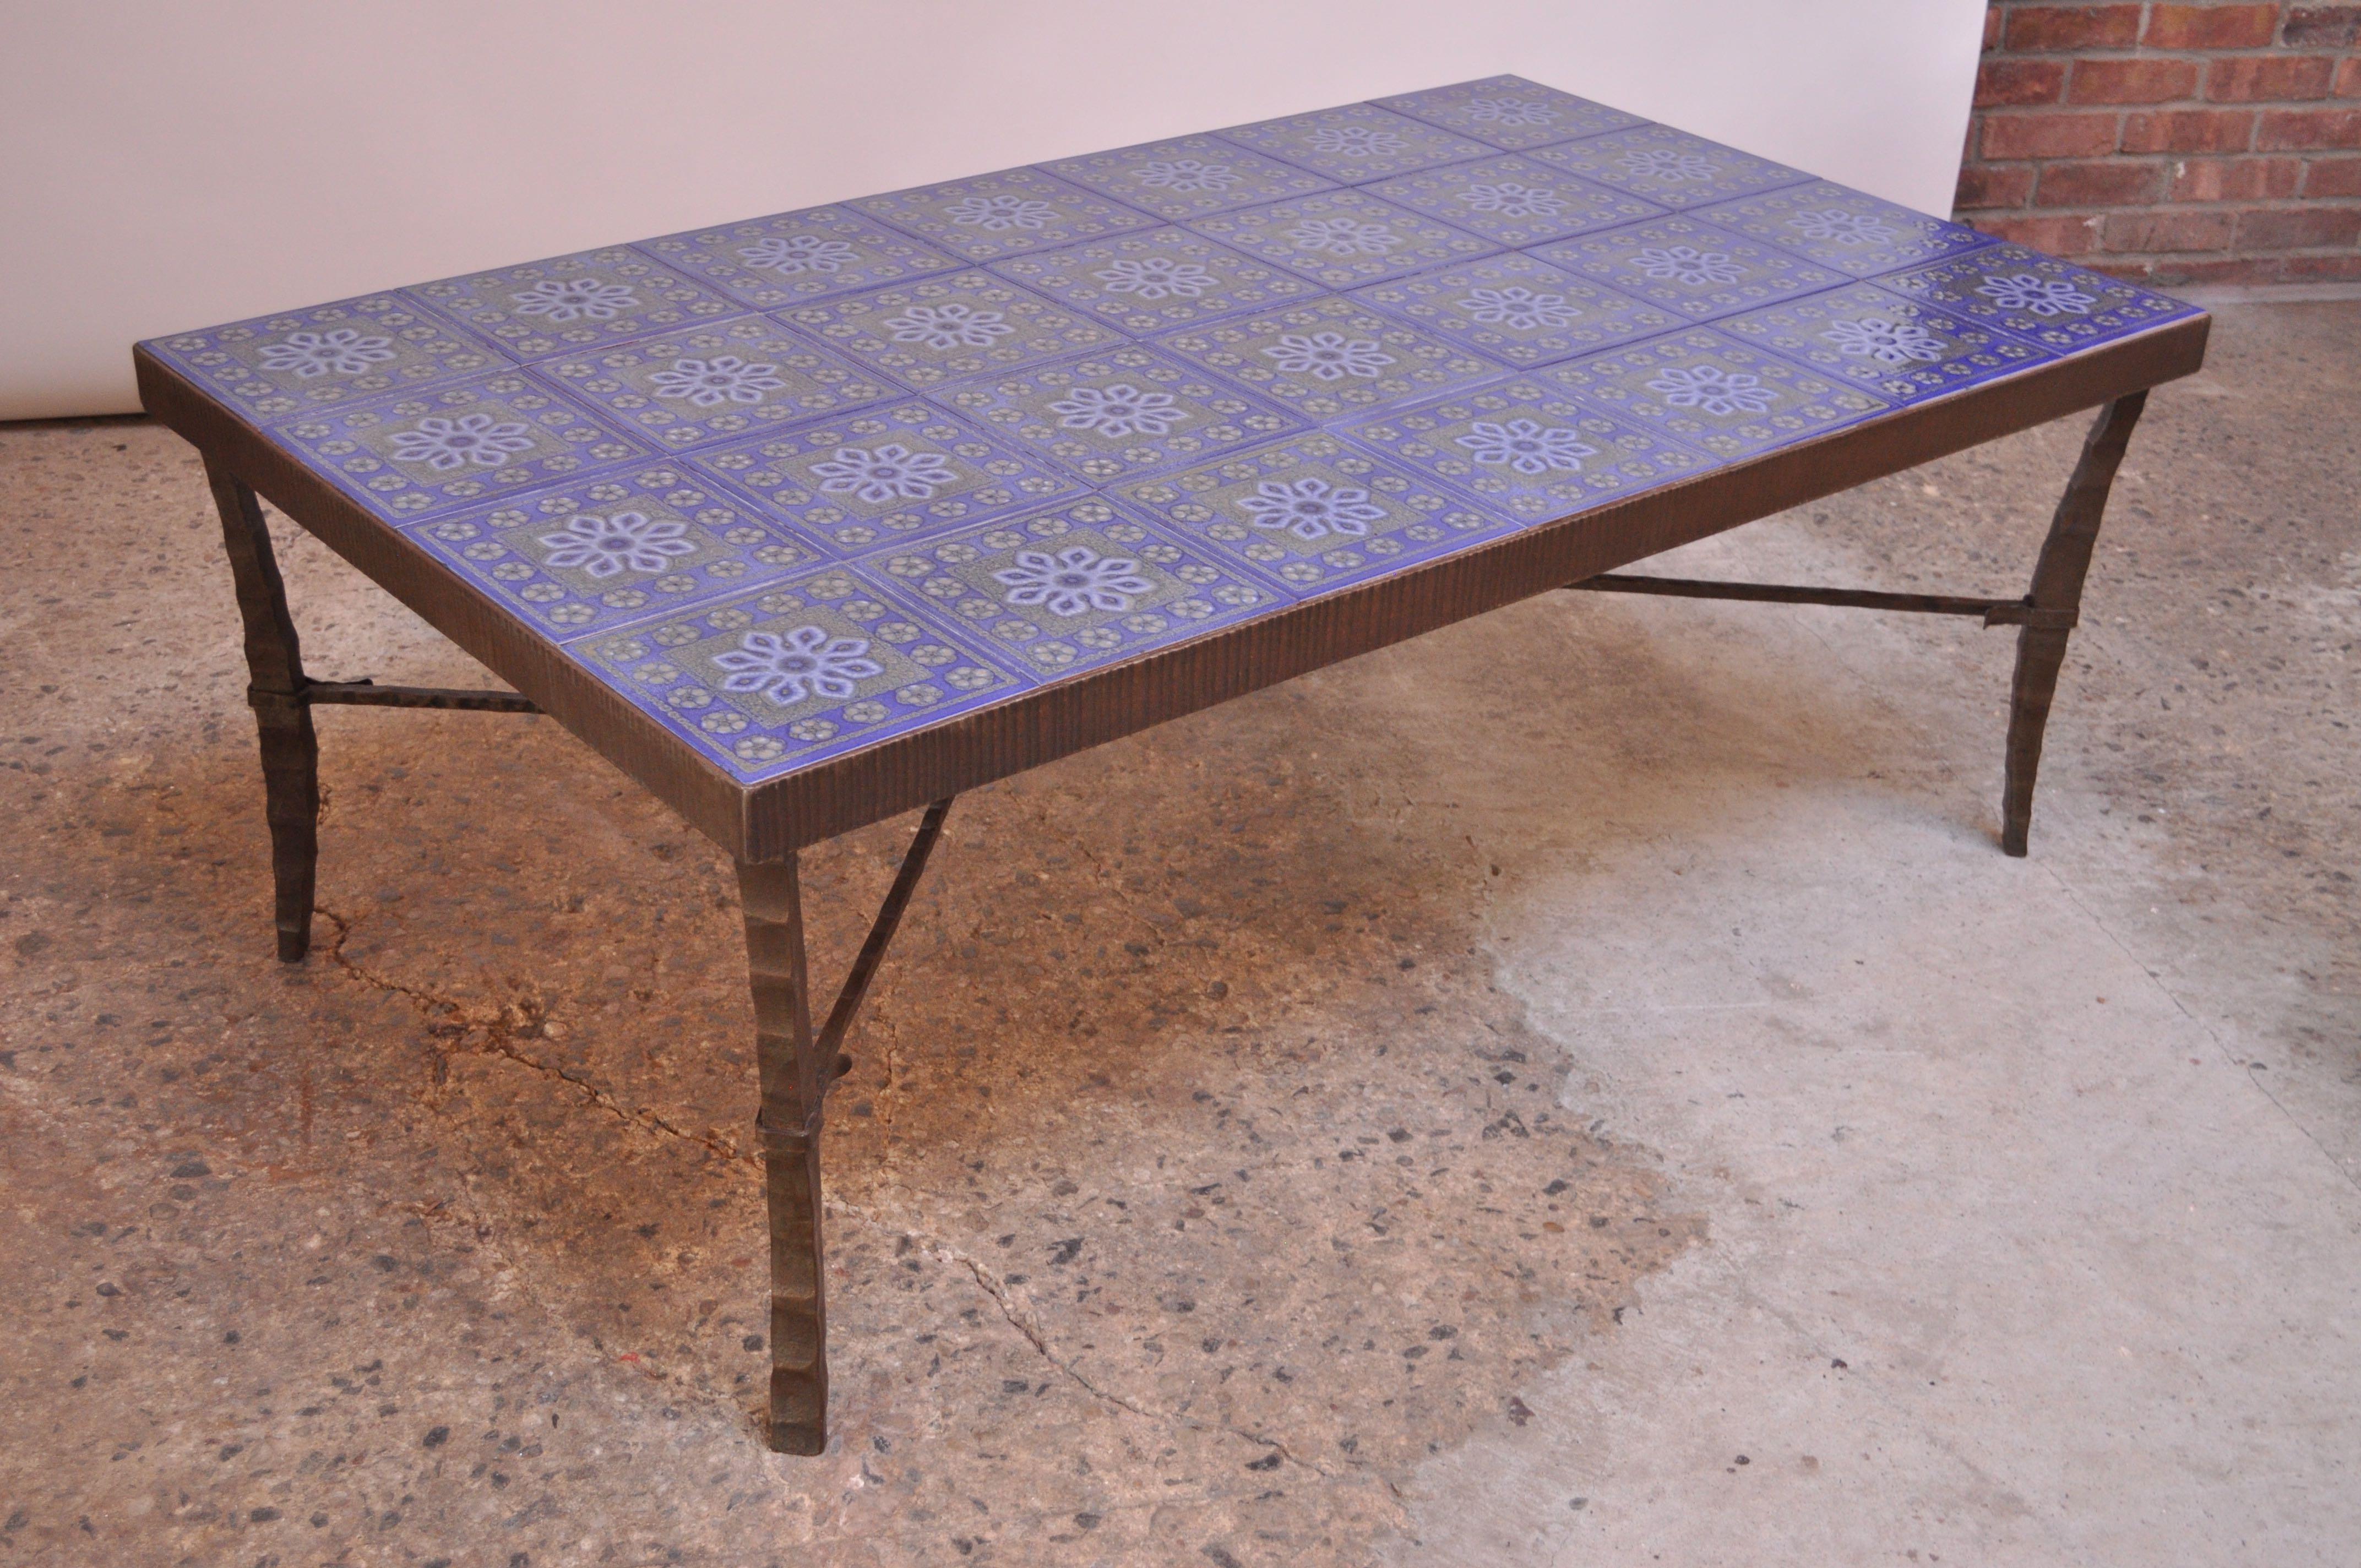 Mid-20th Century Large Scandinavian Modern Forged Bronze and Ceramic Tile Coffee Table